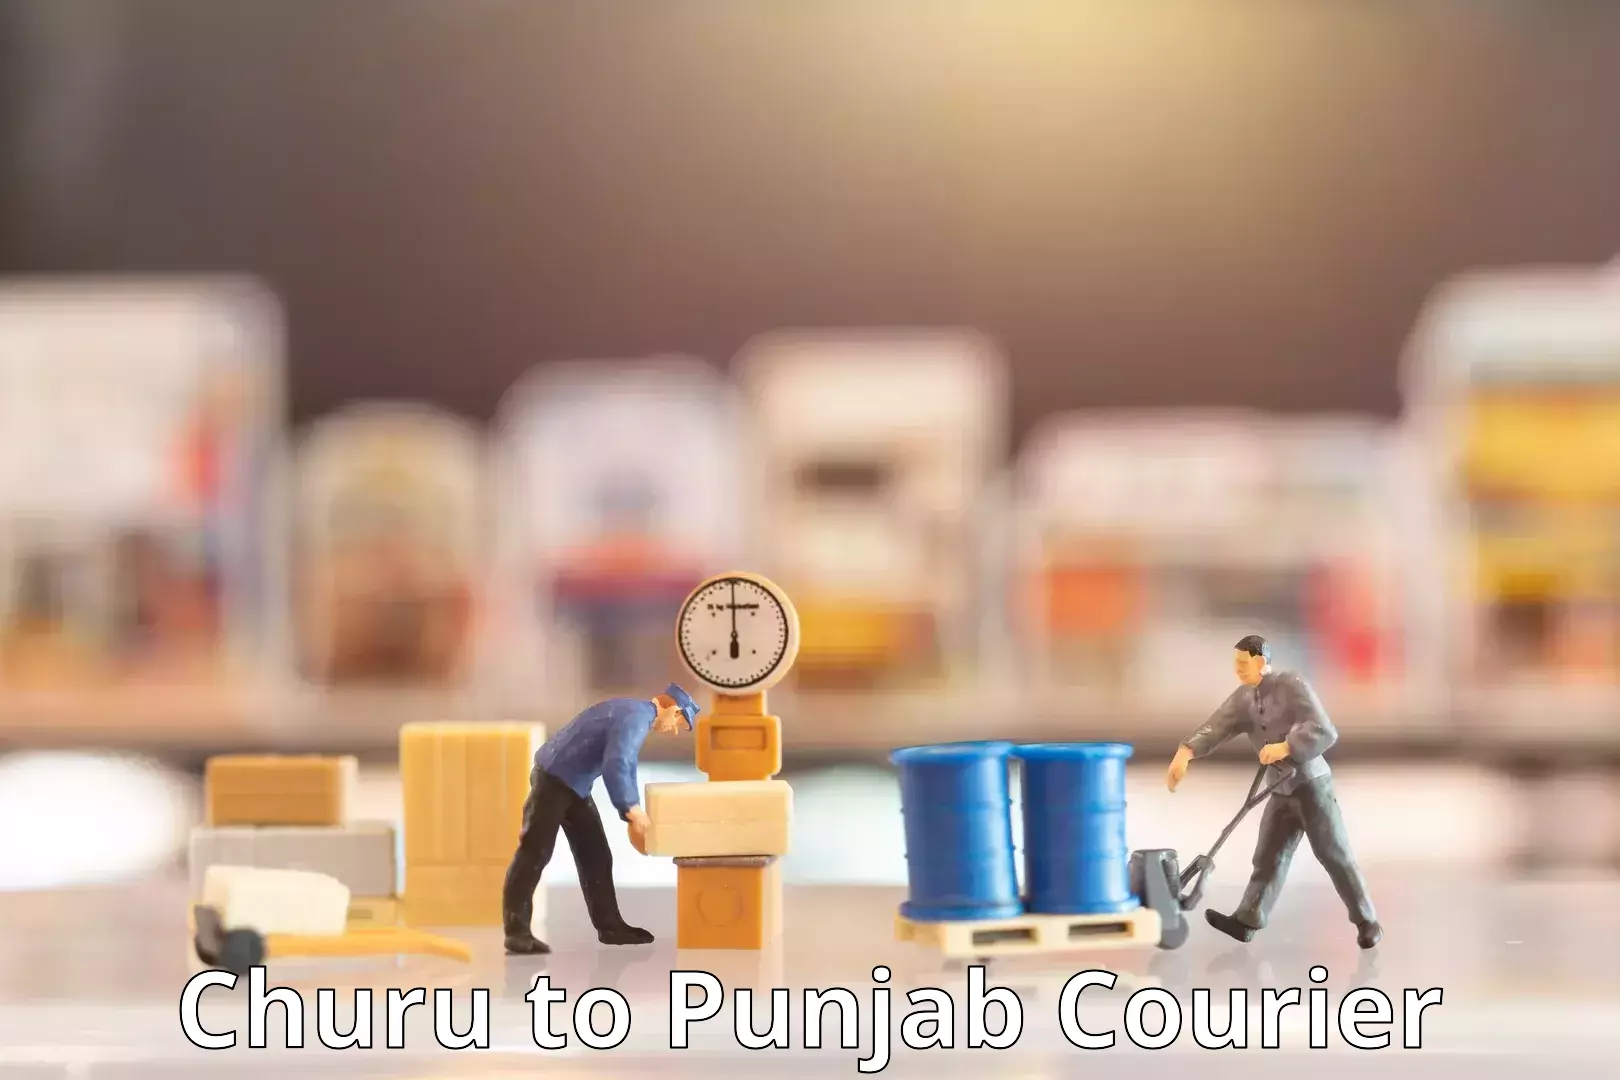 Personal courier services Churu to Pathankot